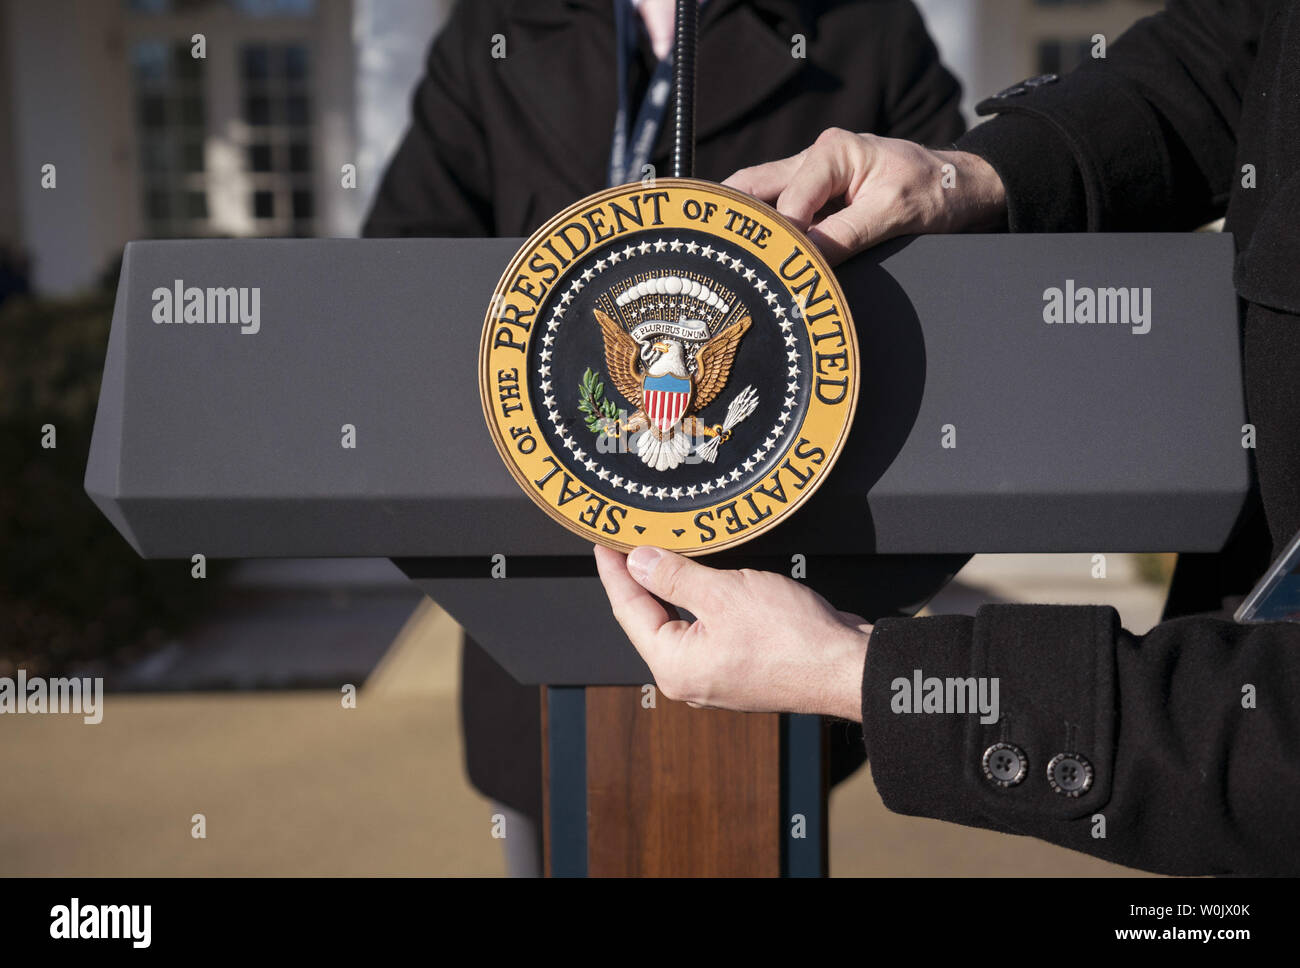 White House staff place the Presidential Seal on President Donald Trump's podium prior to an event where Trump addressed members of the March for Life event, at the White House in Washington, D.C. on January 19, 2018. Photo by Kevin Dietsch/UPI Stock Photo